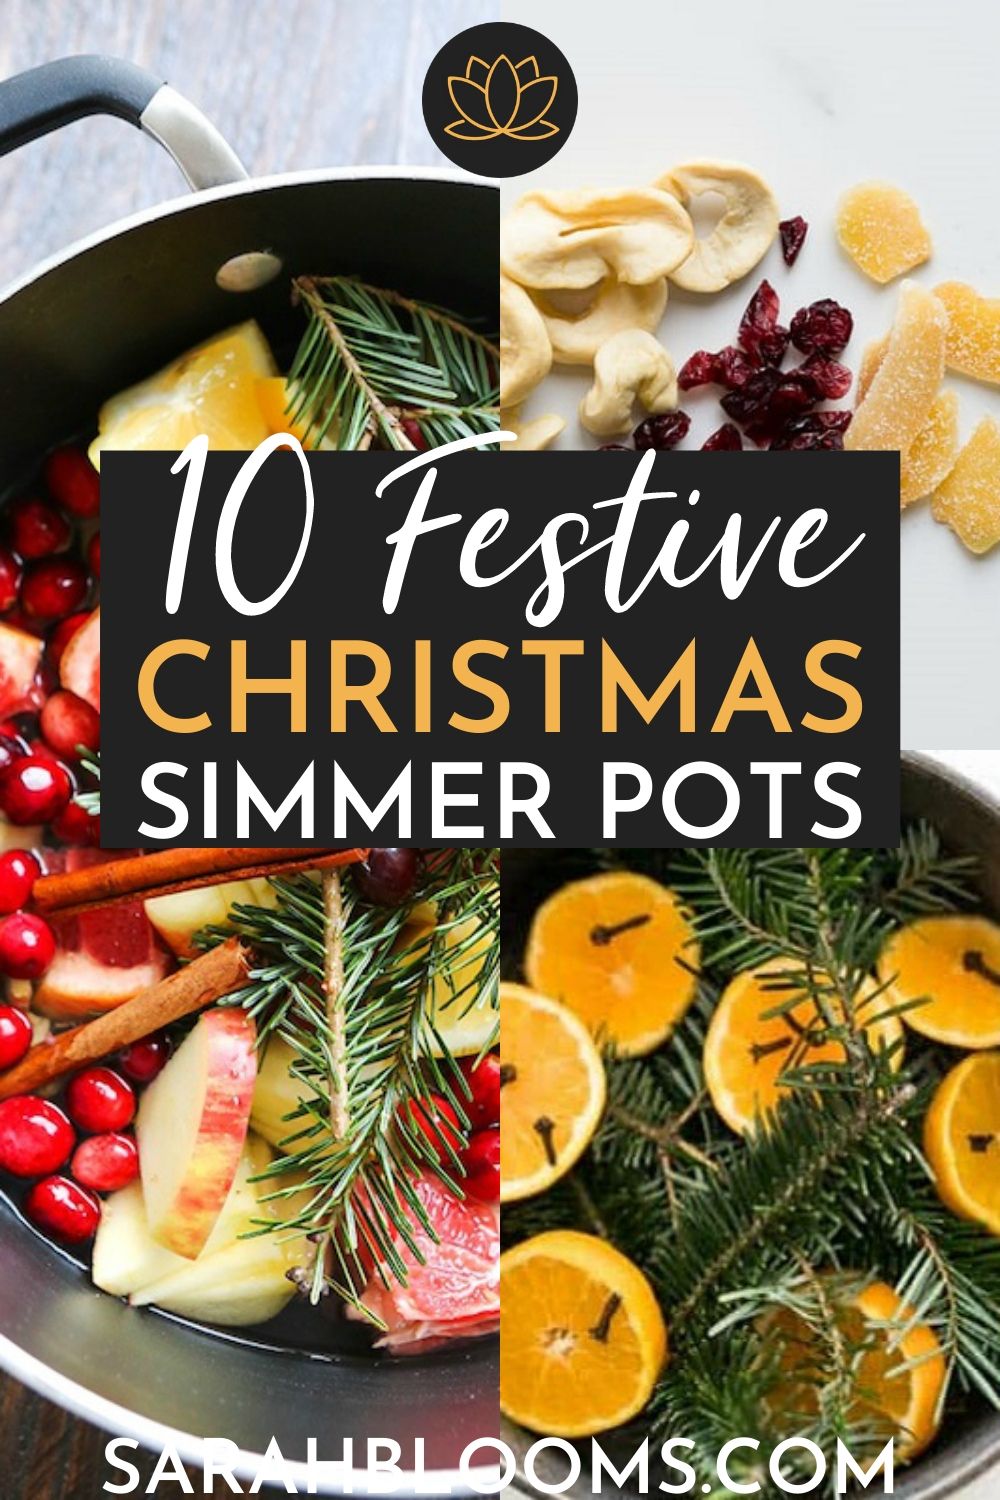 10 Festive Simmer Pots that will transform your home in minutes! Get ready for holiday guests with these 10 Fun + Festive Christmas Simmer Pots that will make your whole home smell like the holiday!